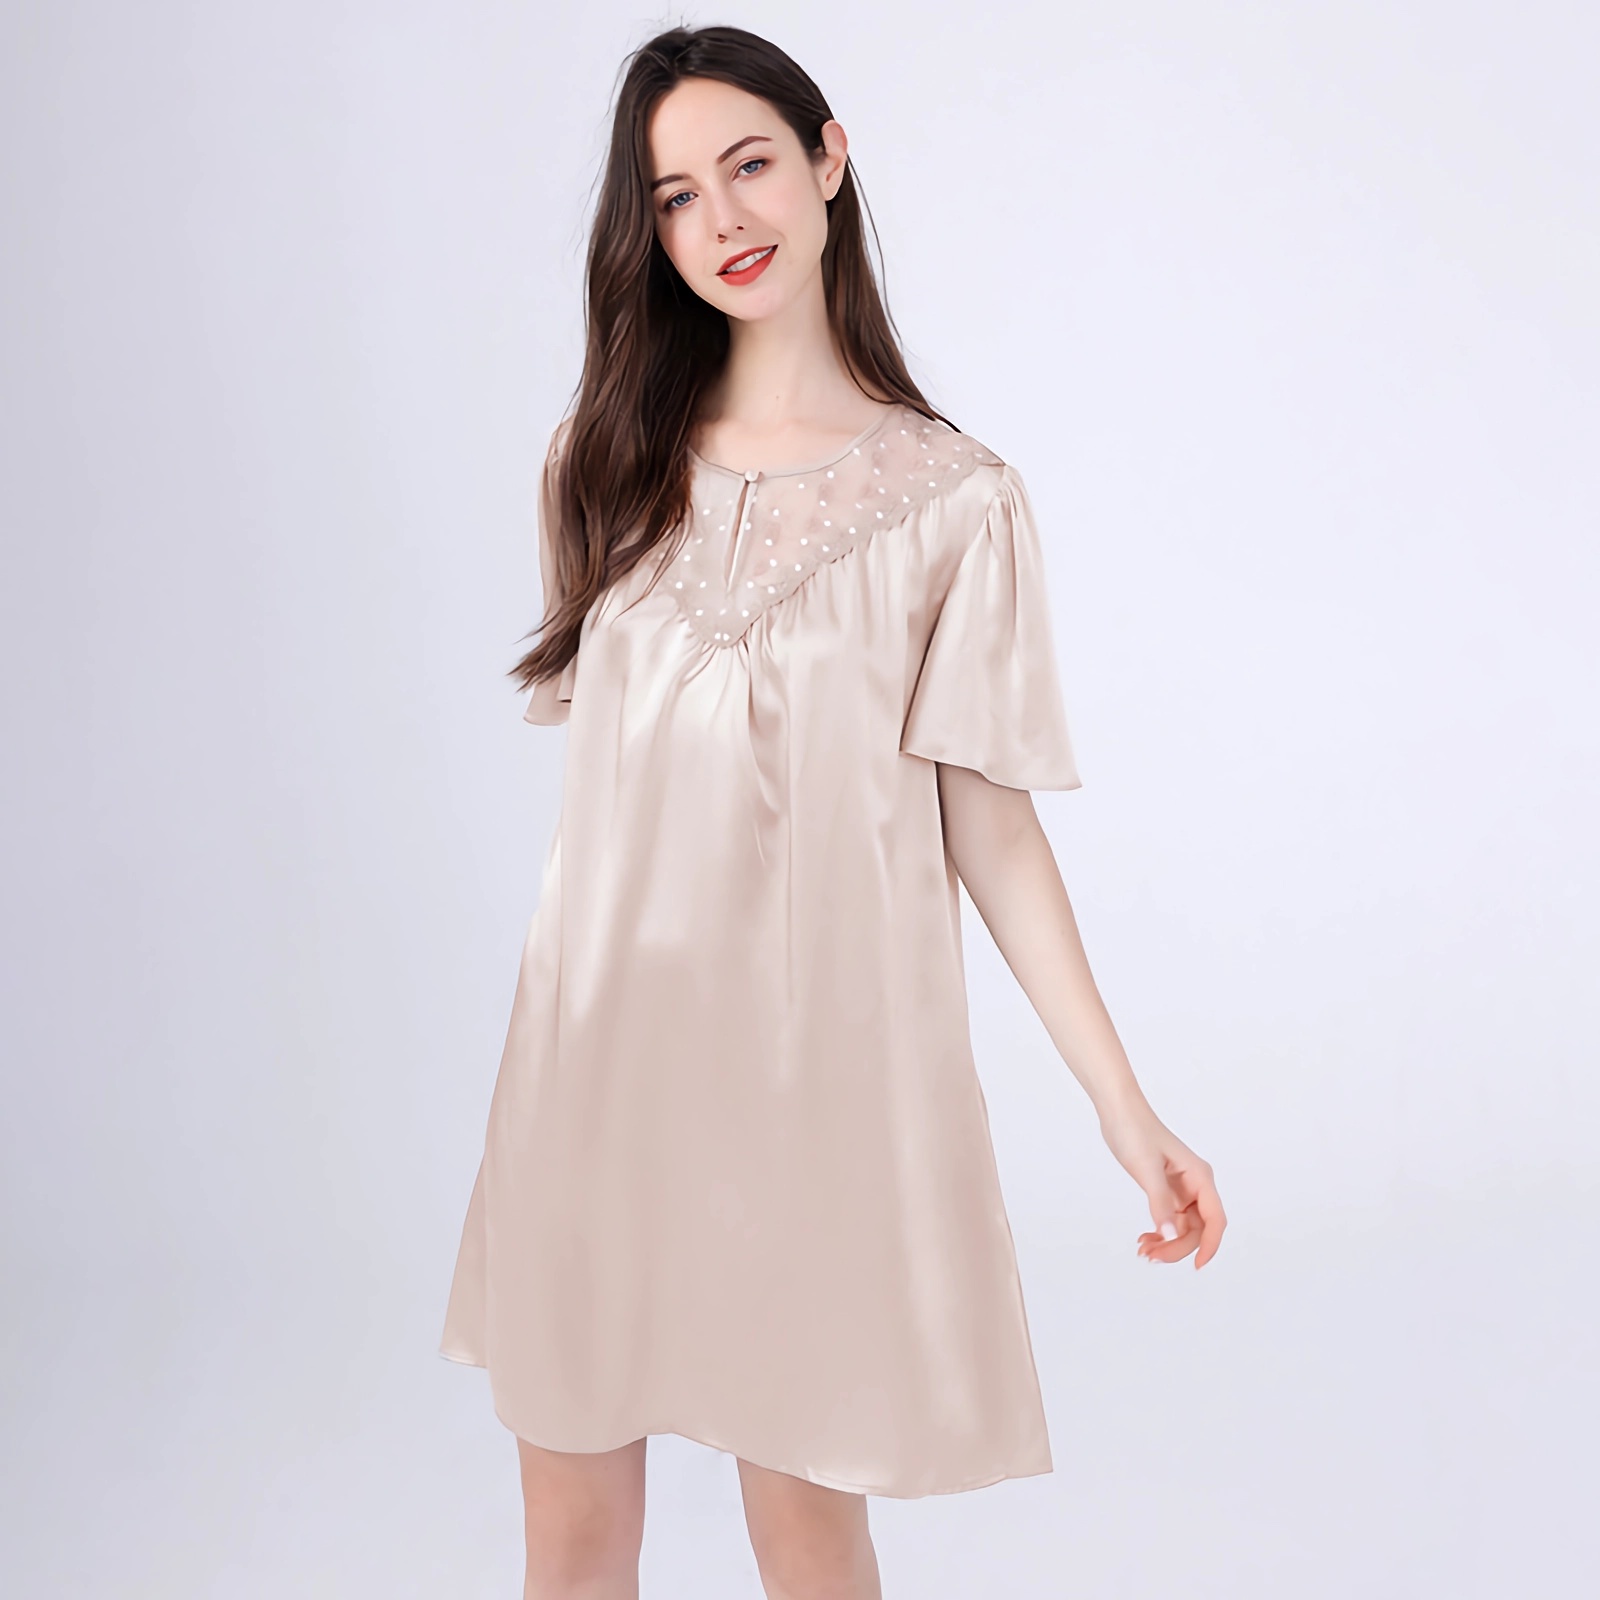 Silk Nightgowns For Women Short Sleeve REAL SILK LIFE